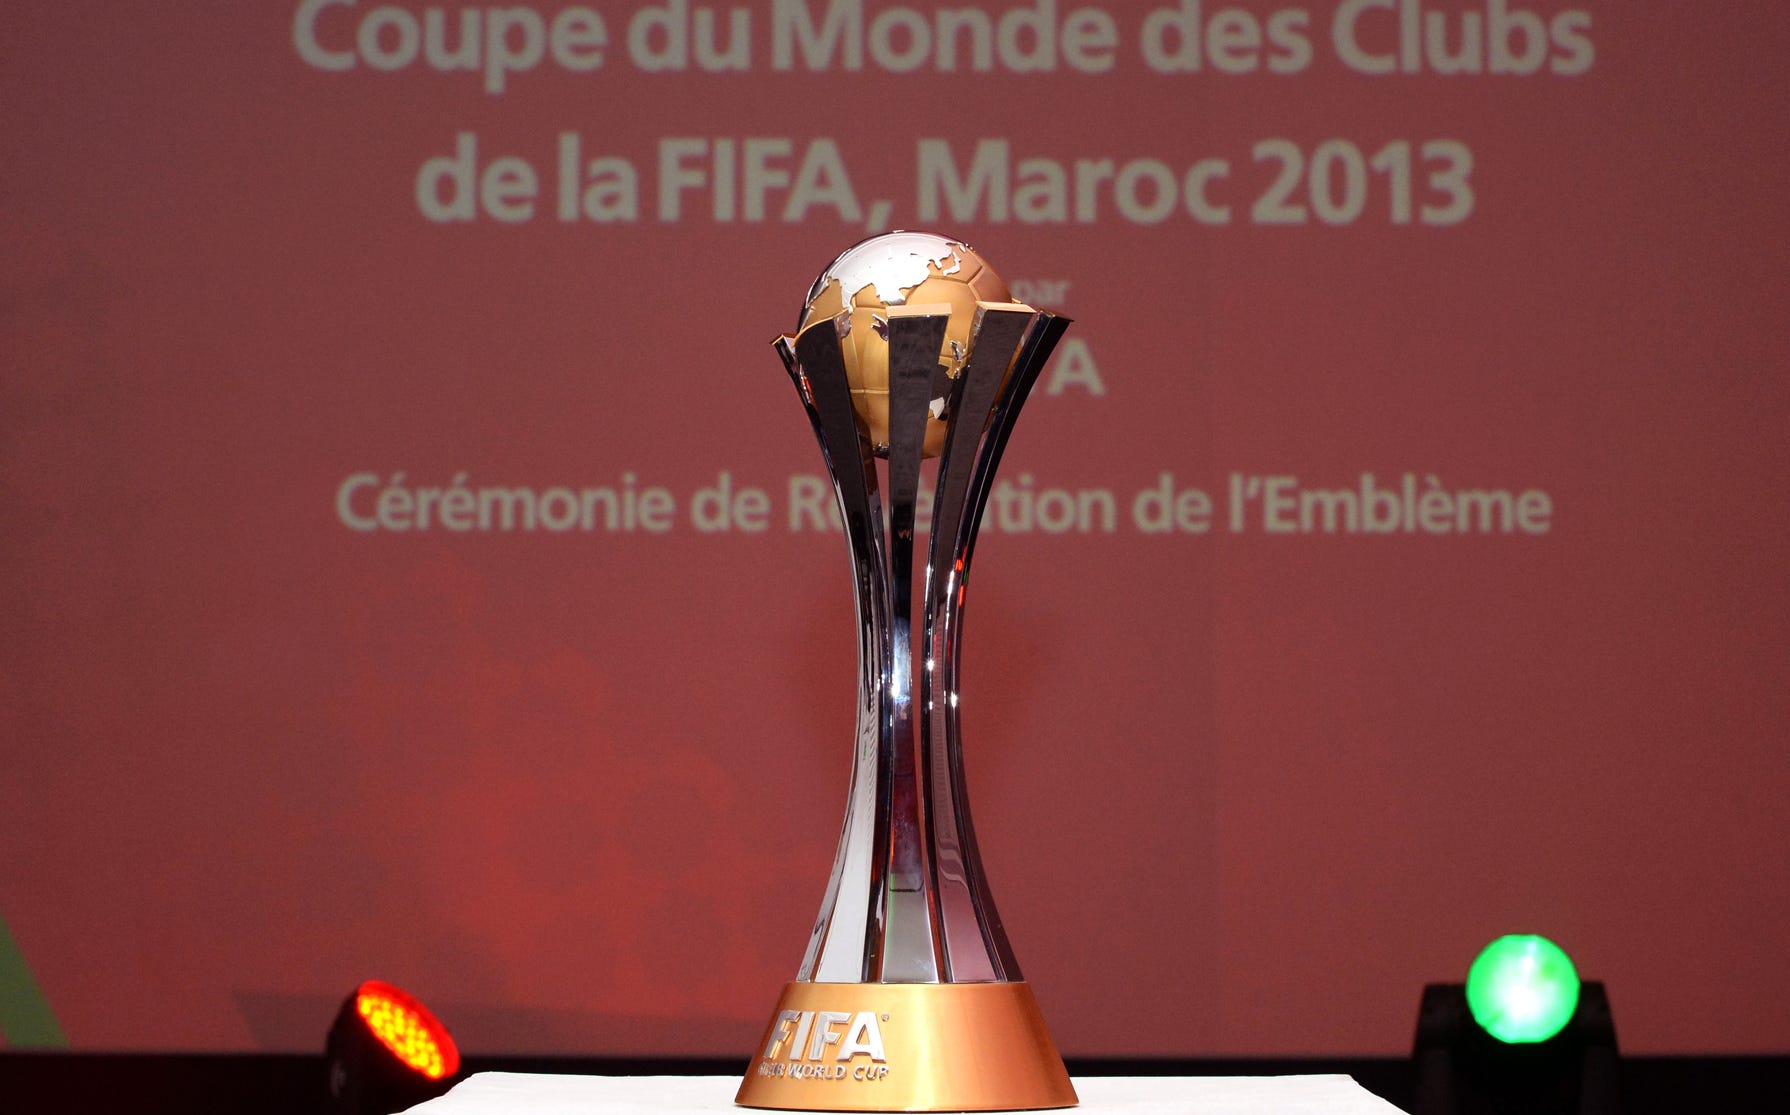 The FIFA Club World Cup 2013 trophy